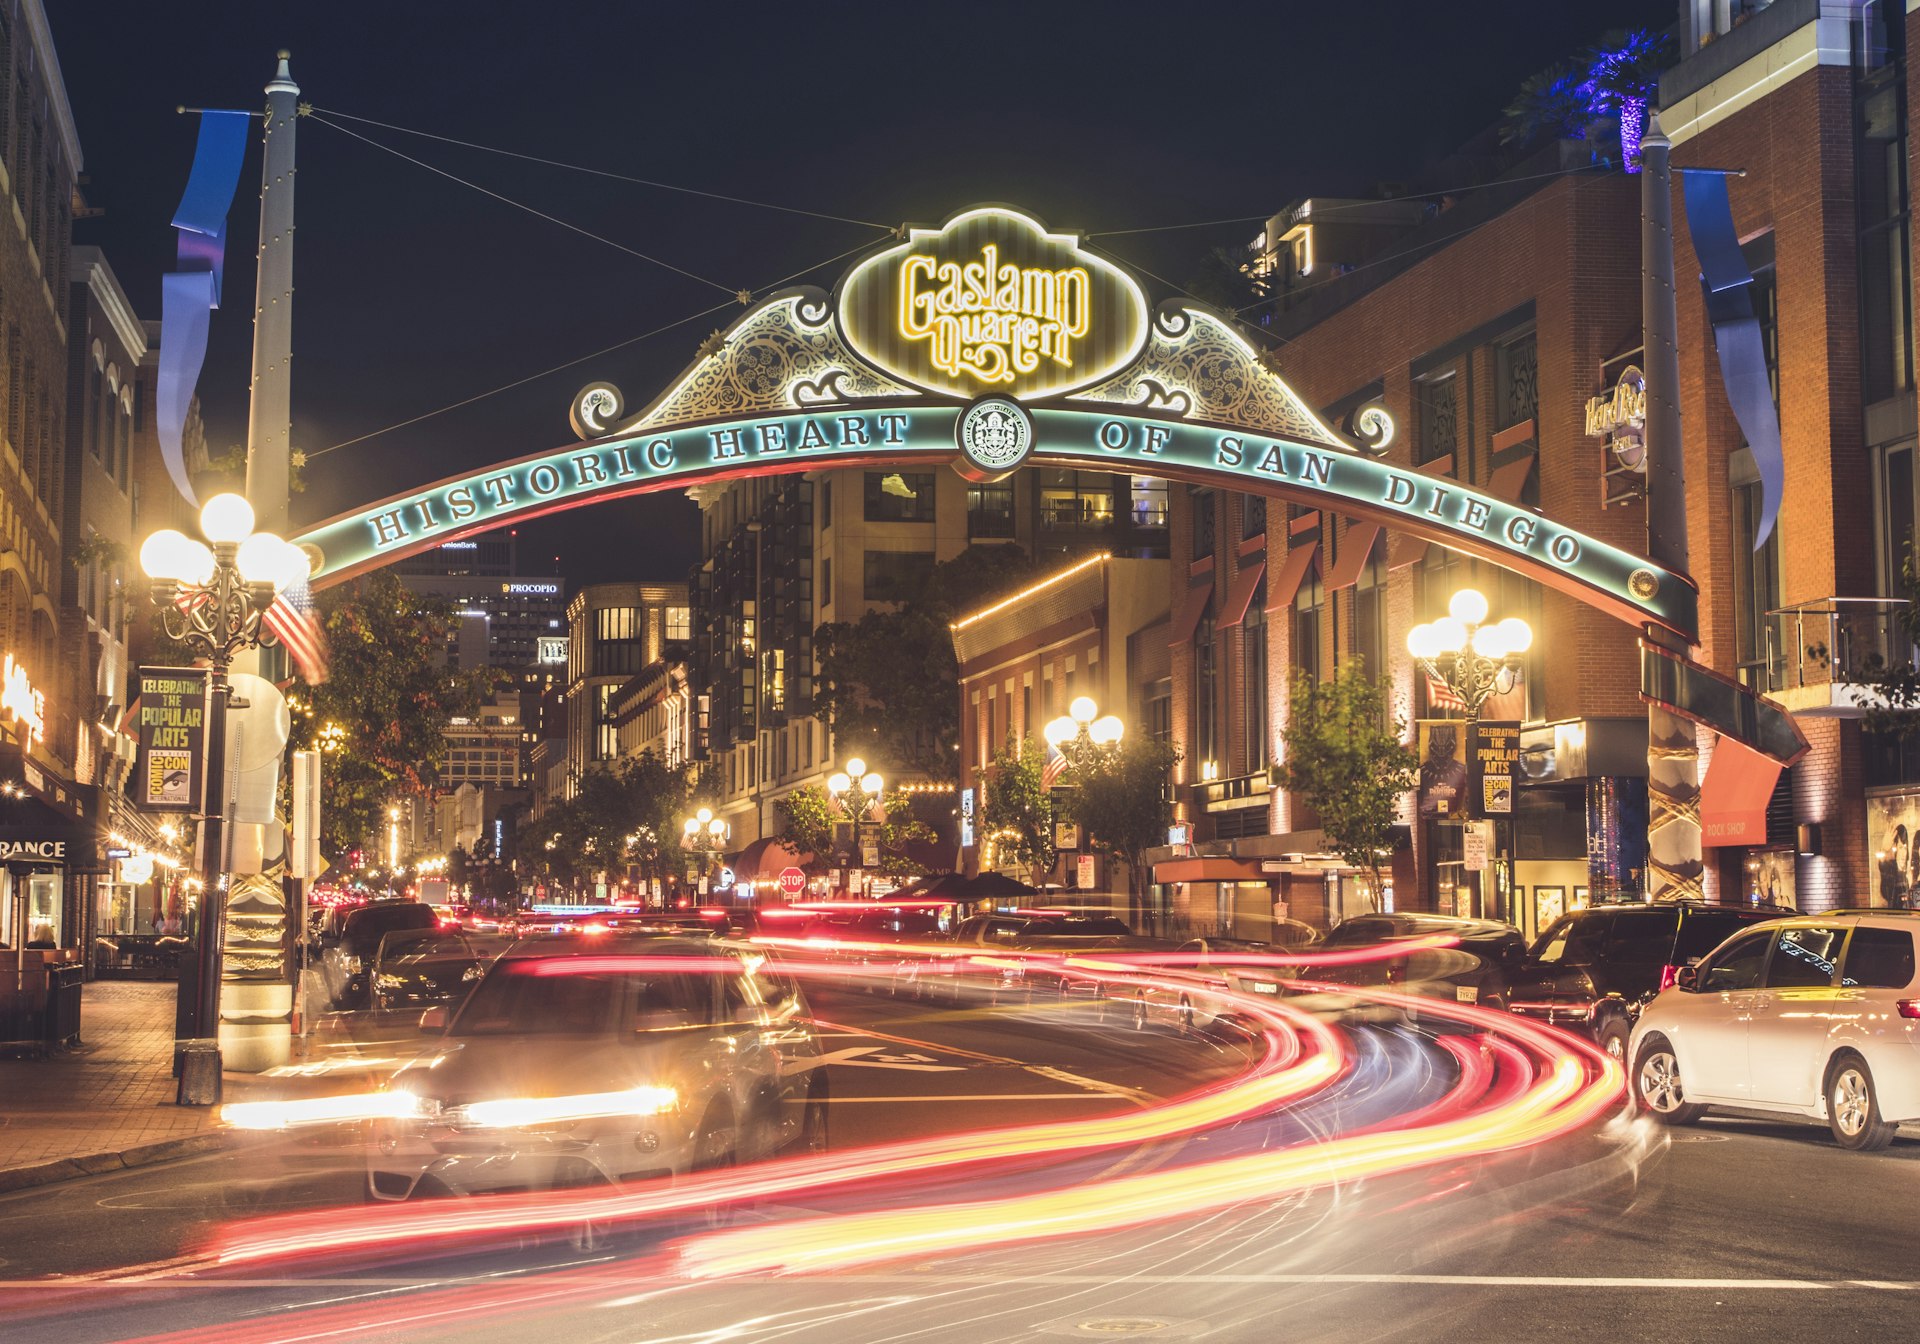 A night time shot of a busy street scene. A large banner sign reads "Gaslamp Quarter: historic heart of San Diego".